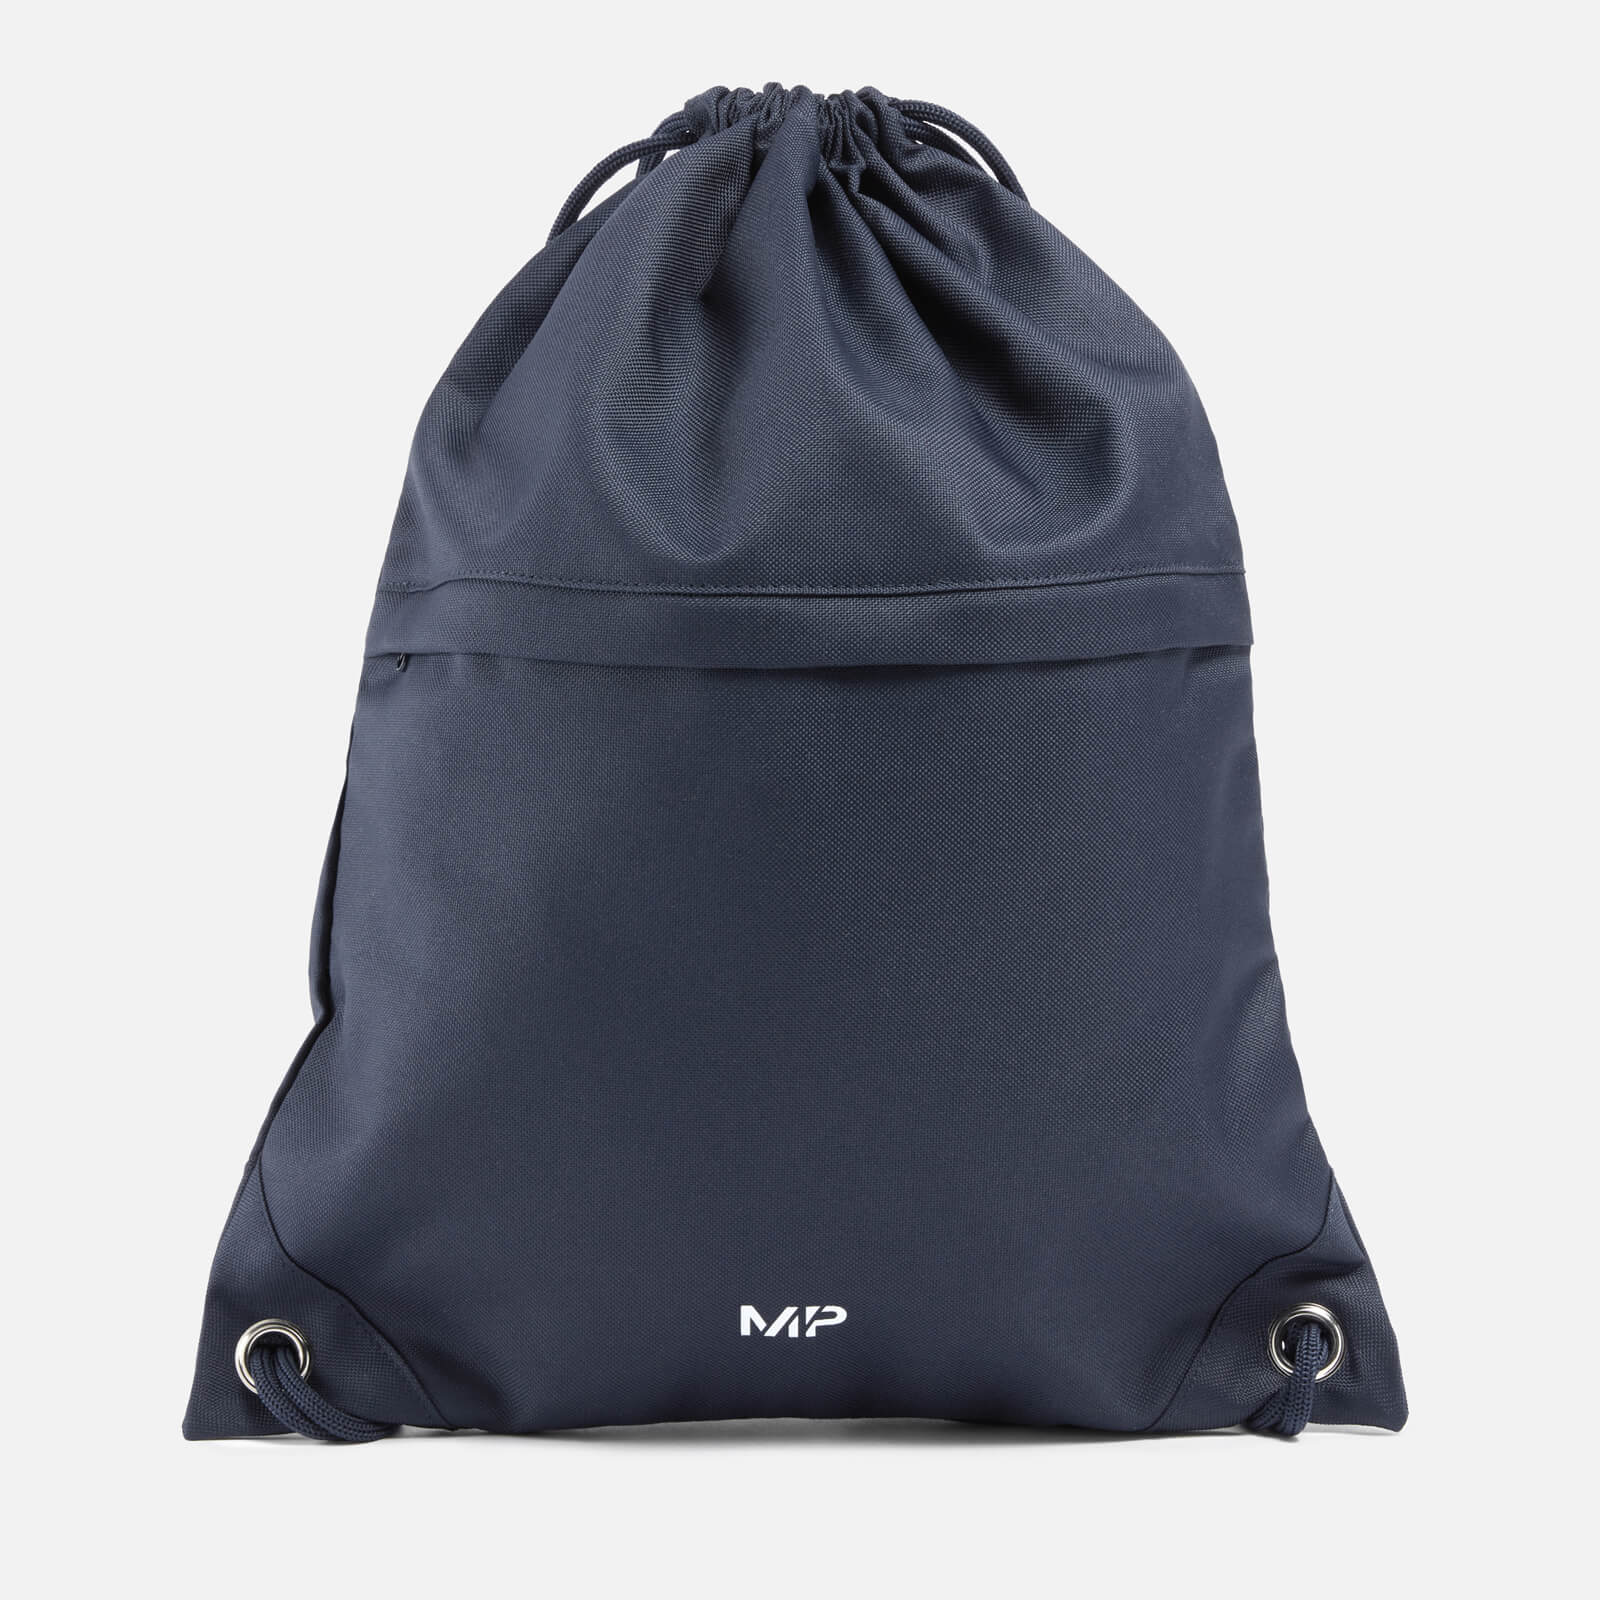 Image of Borsa con coulisse MP - Blu navy